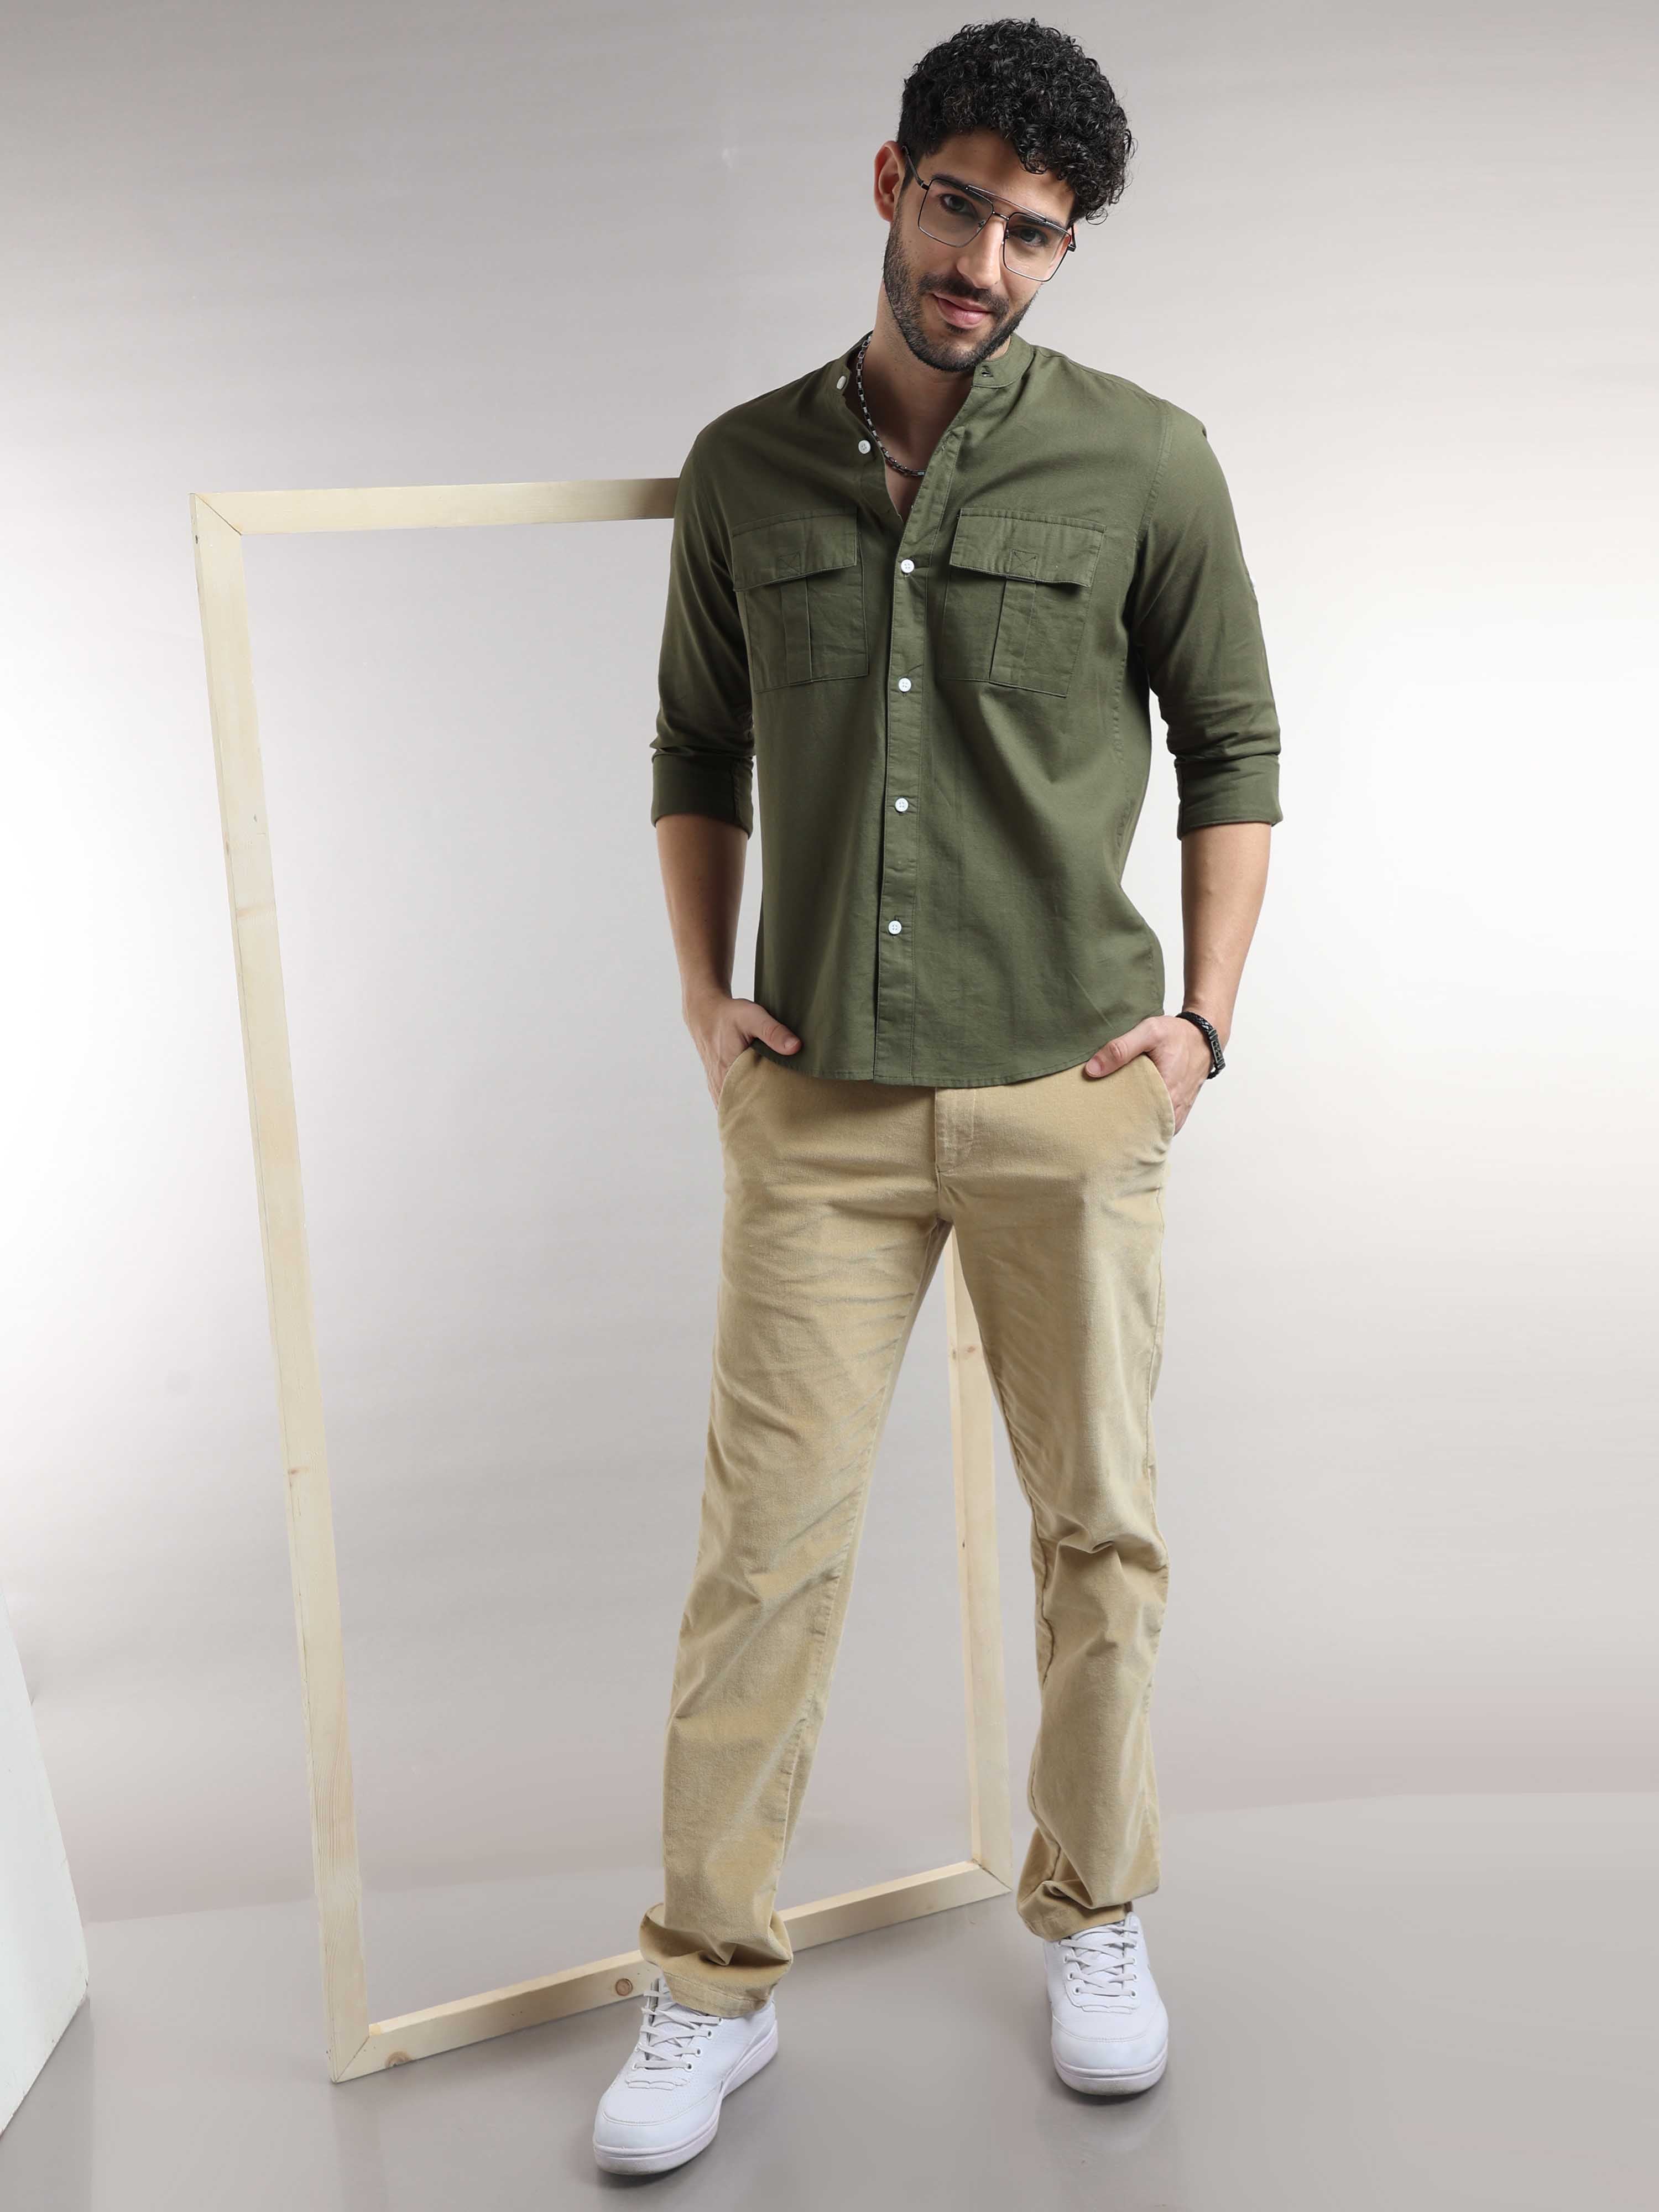 Shop cool Army Green Double Pocket Casual Shirt For MenRs. 1399.00